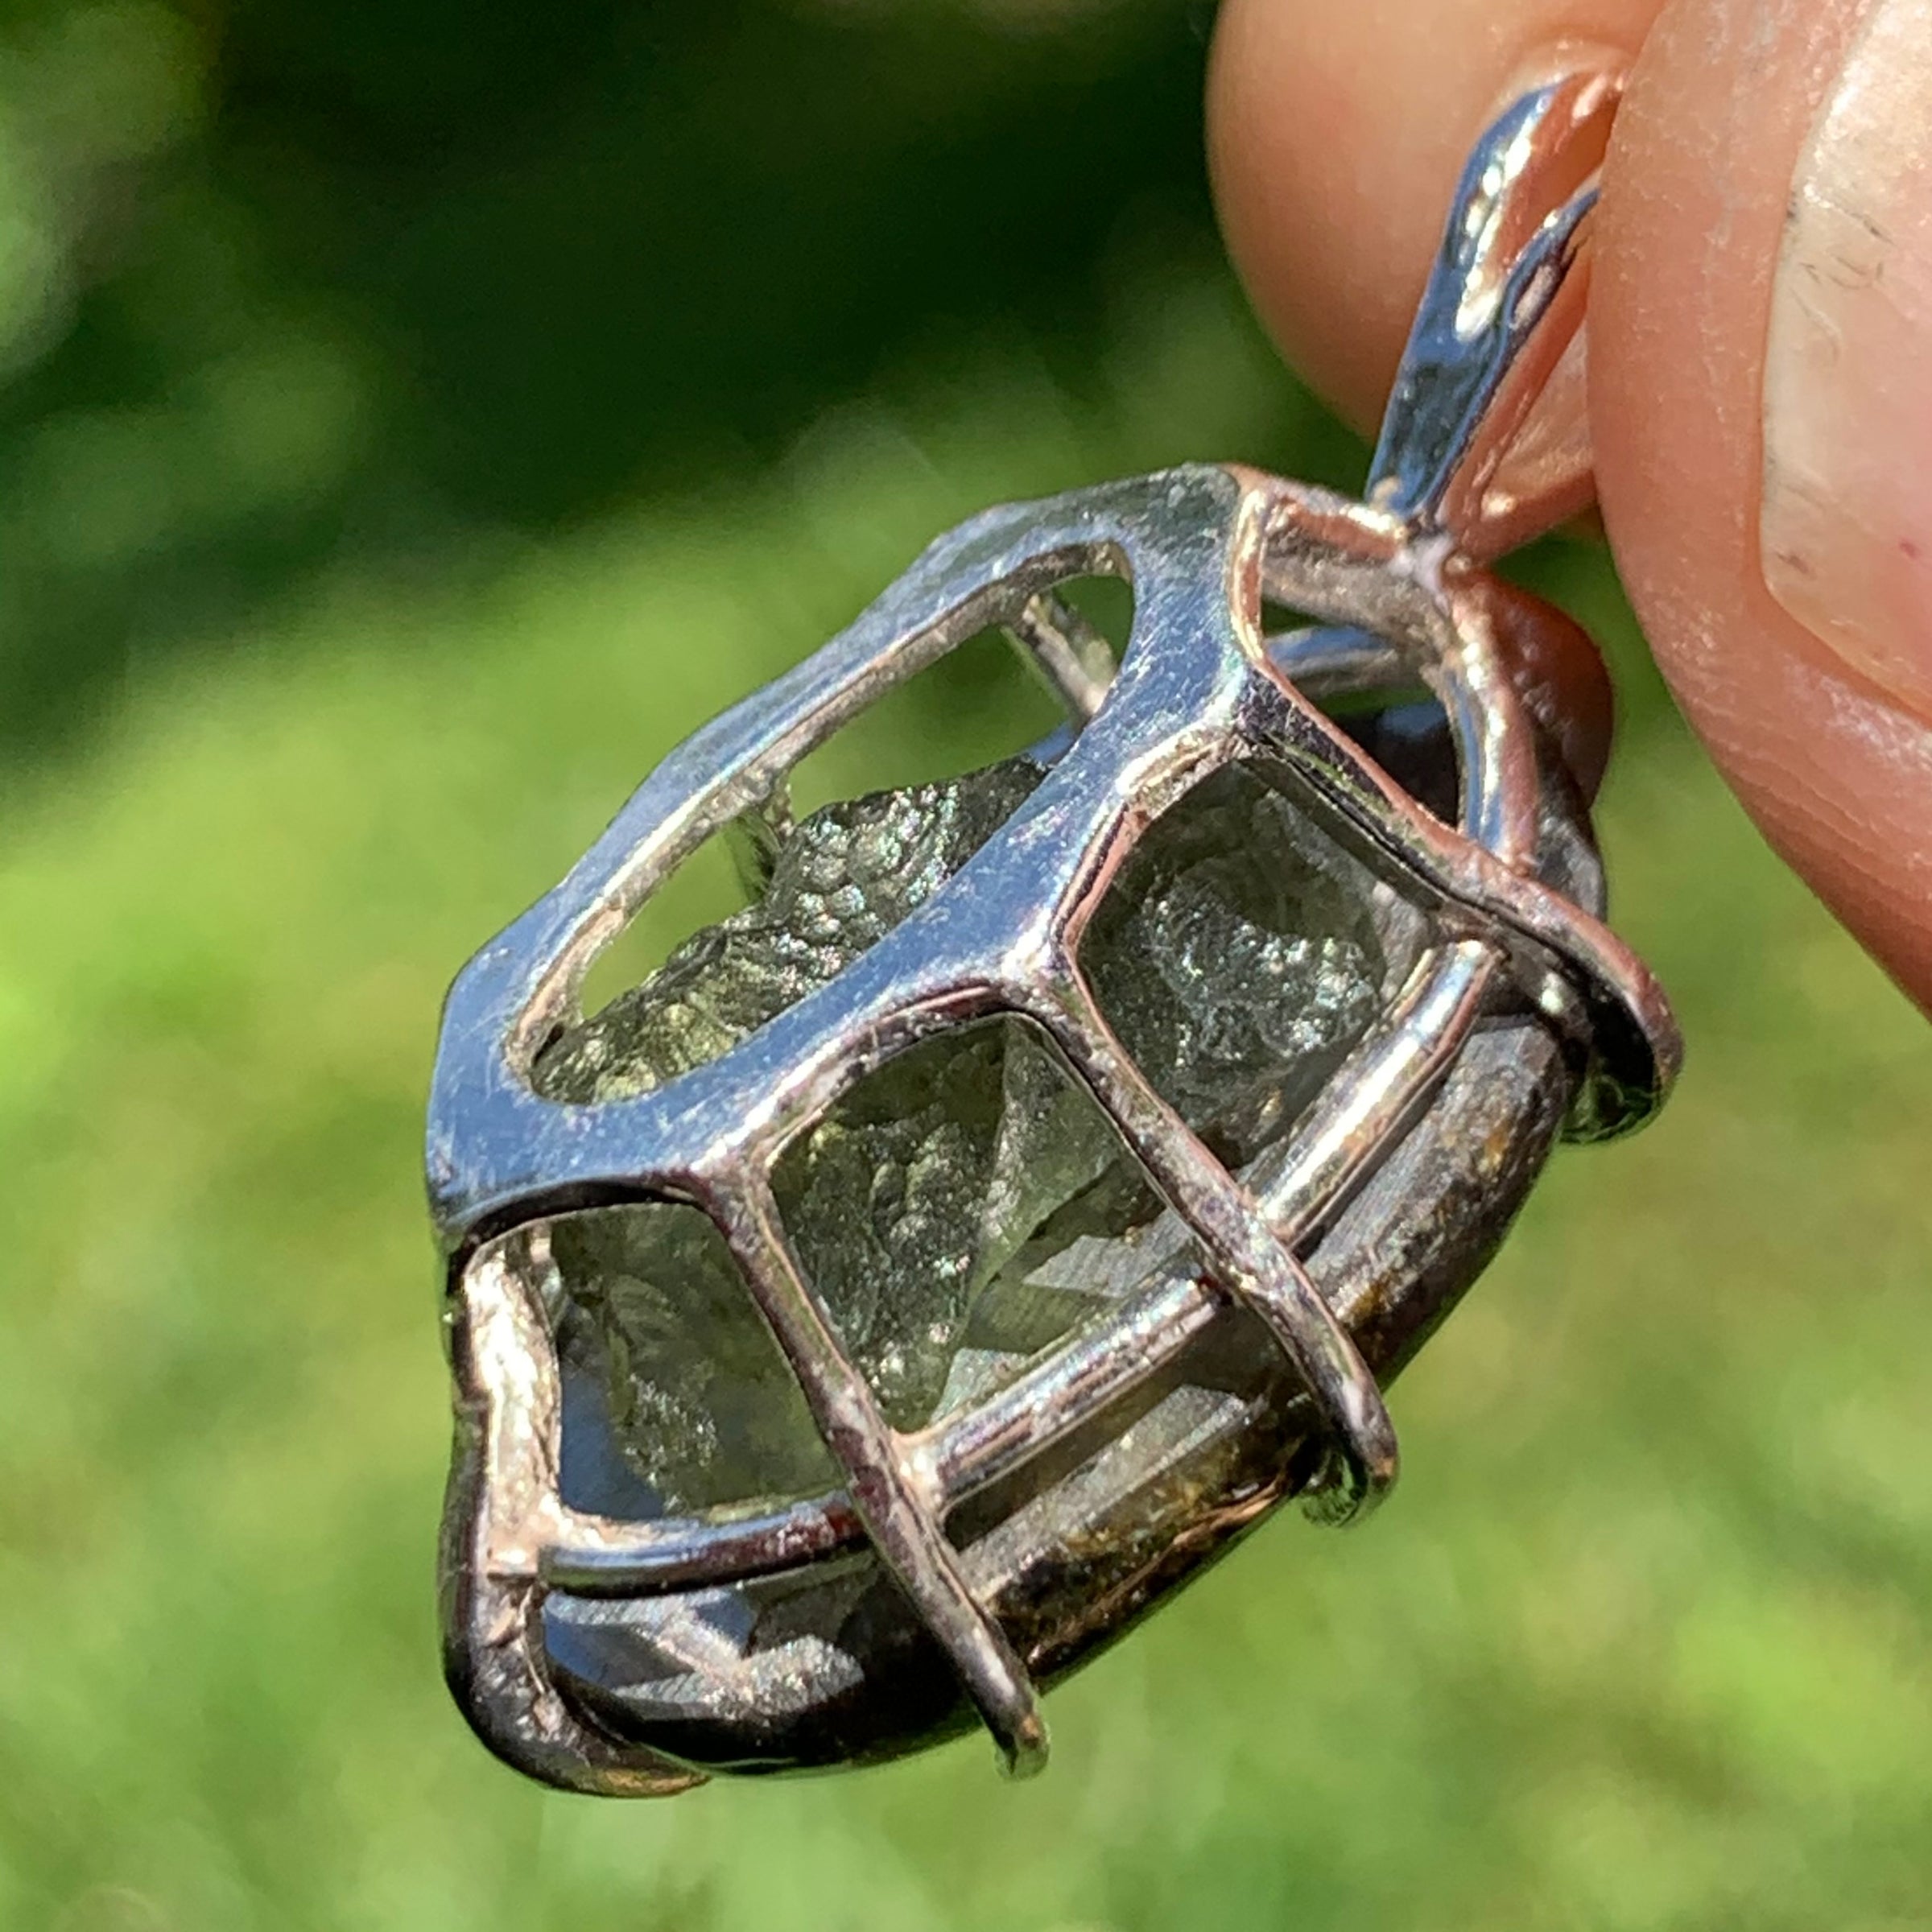 moldavite shows through the backside of a sterling silver sericho pallasite meteorite and raw moldavite tektite basket pendant held up on display to show details